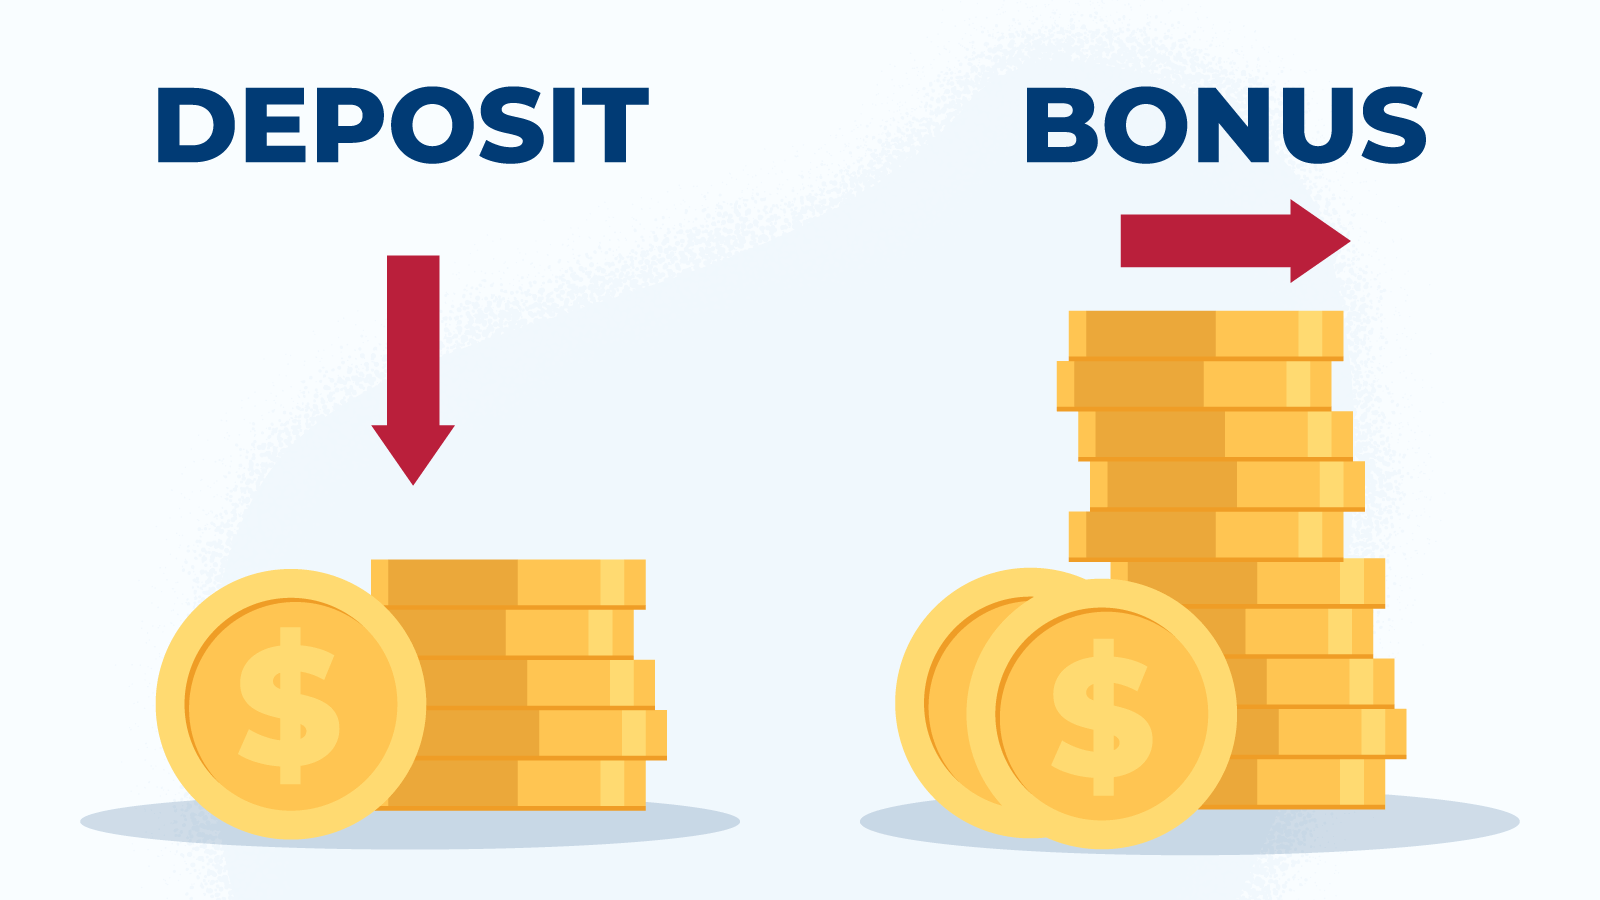 2.How much bonus funds will you receive